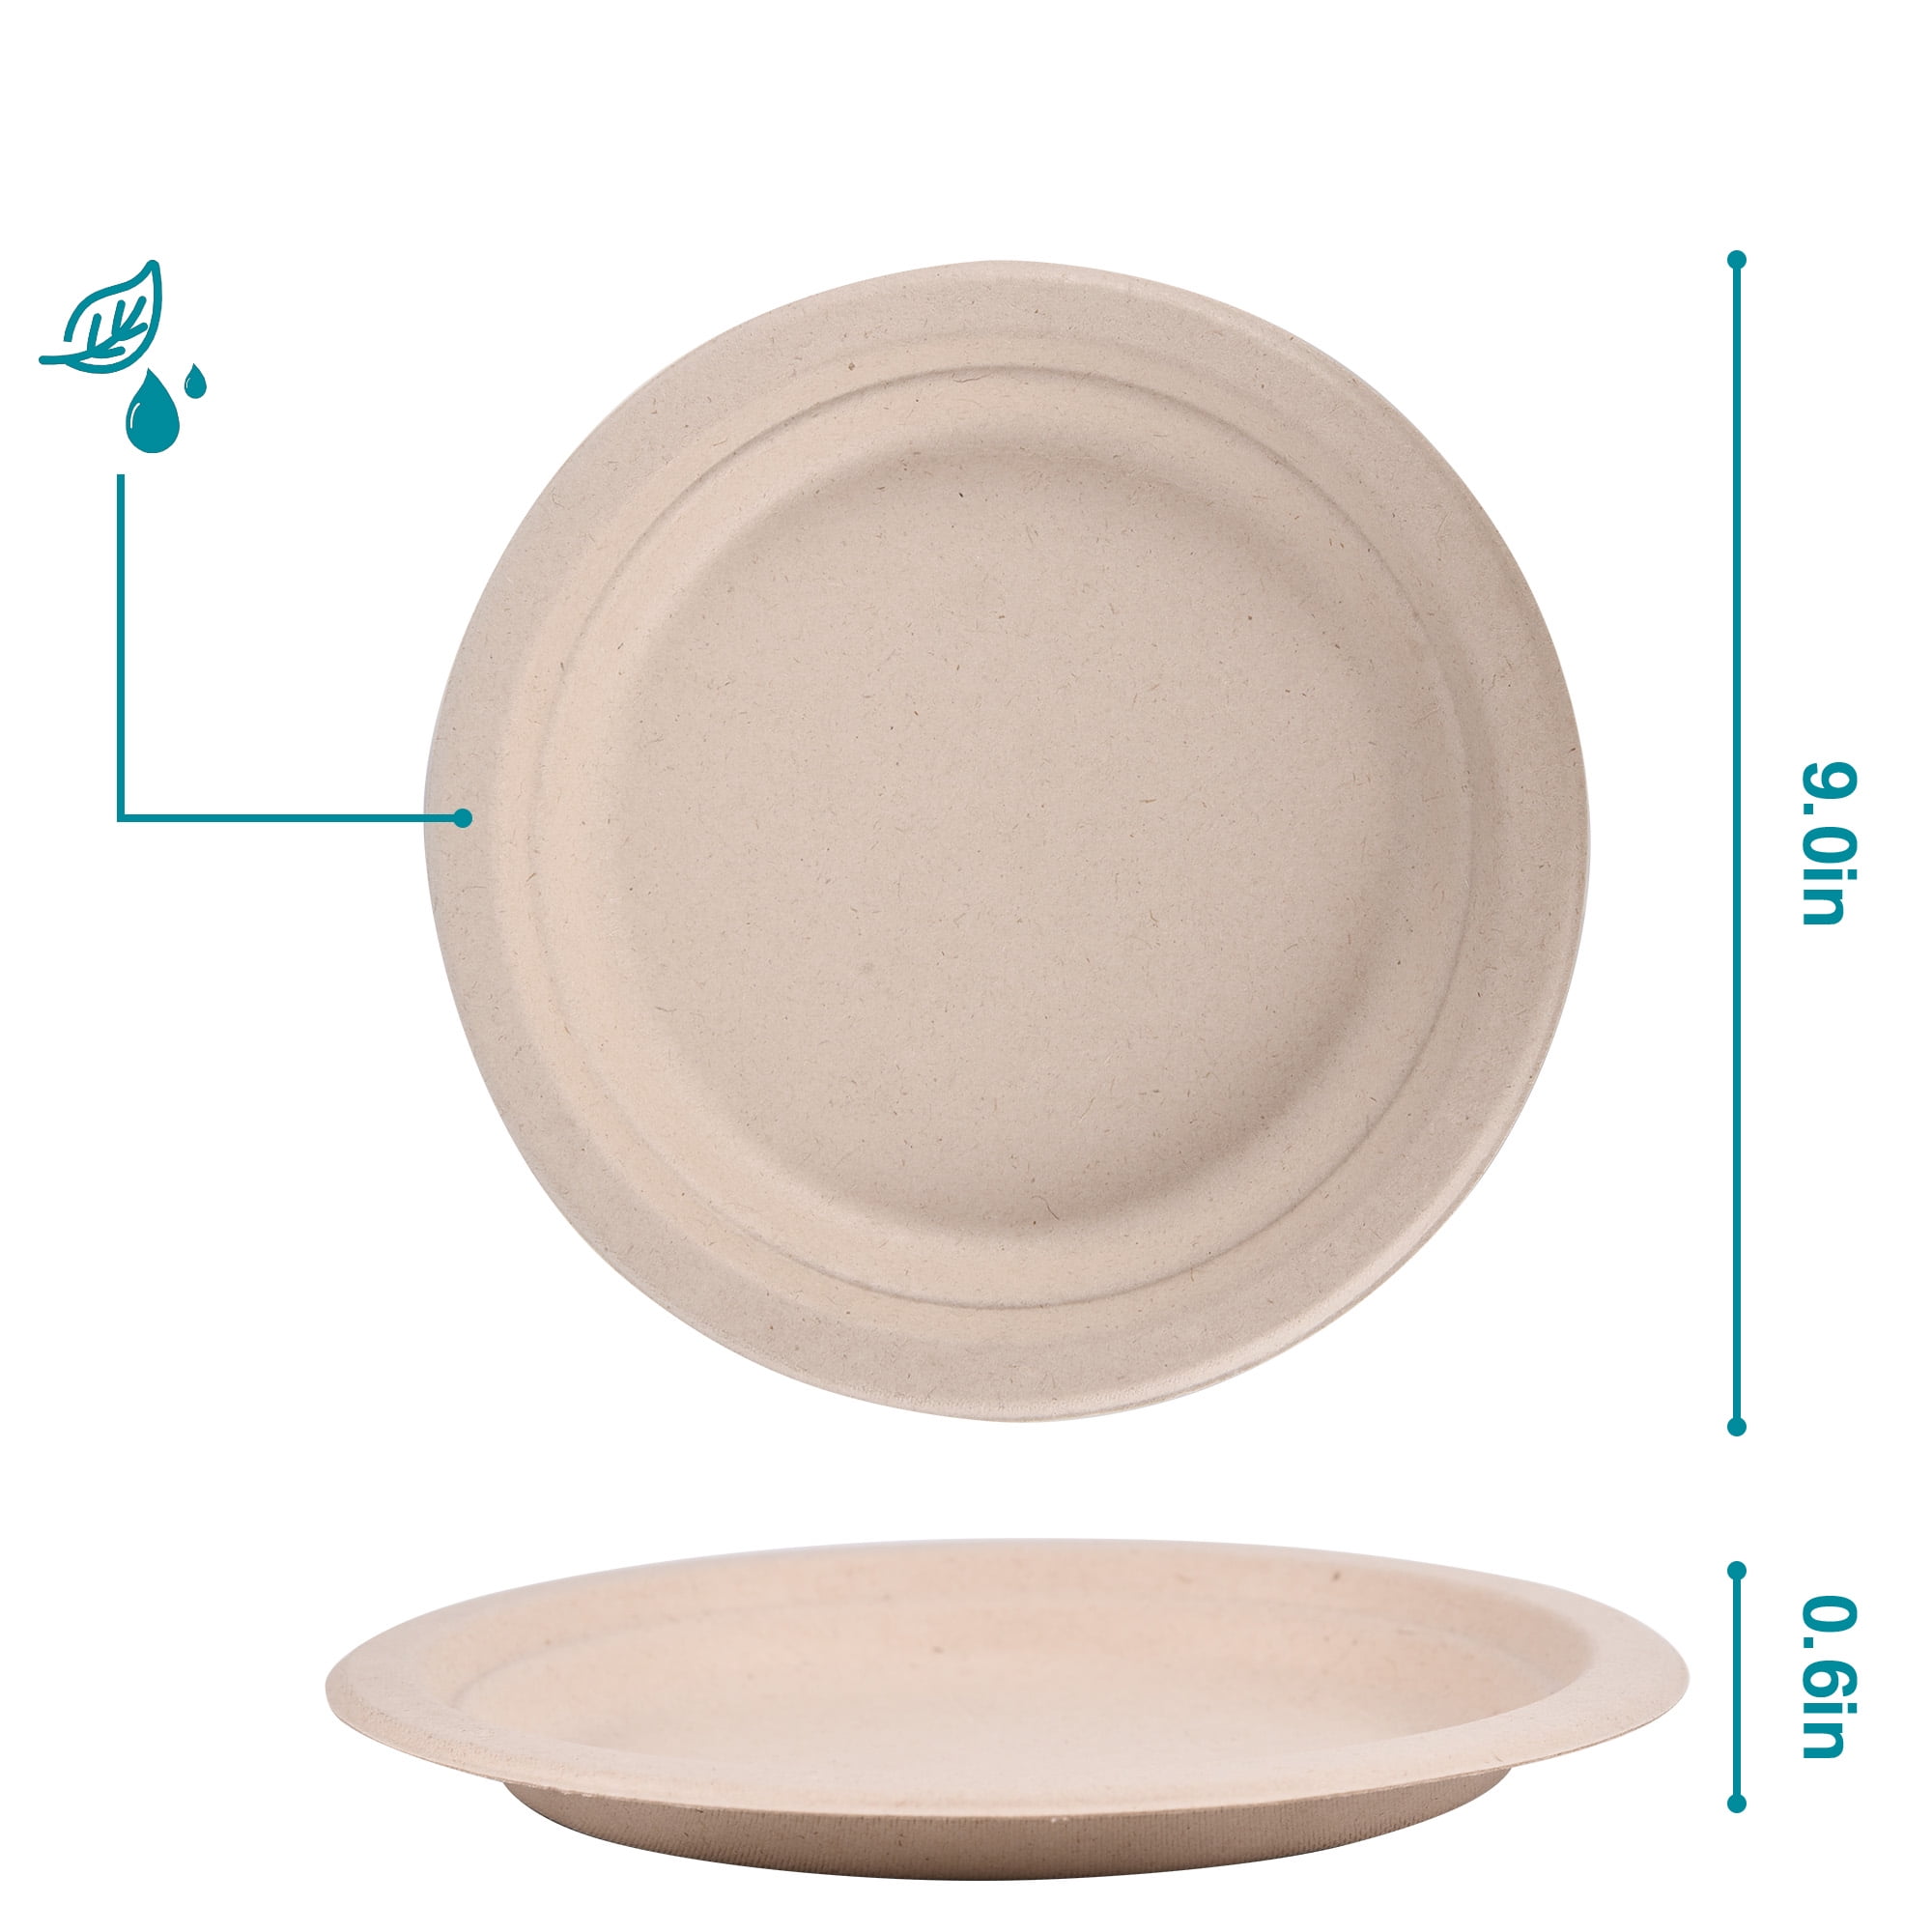 WGCC Paper Plates, 9 Inch Heavy Duty Compostable Disposable Plates, Bulk  Paper Plates Made of Biodegradable Eco-Friendly Bagasse for Party, Wedding